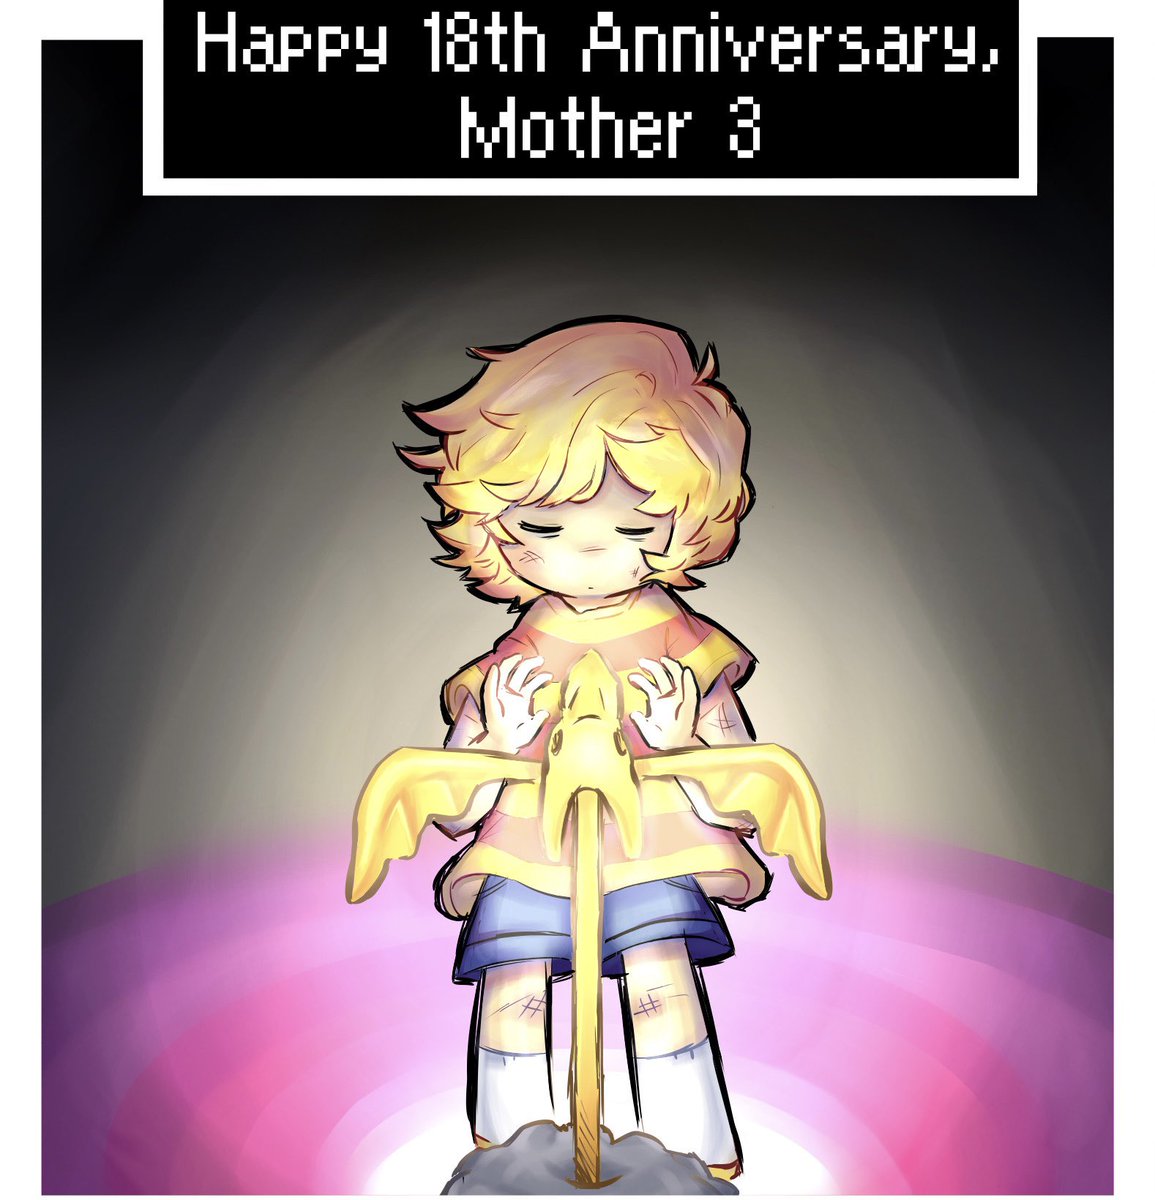 Here’s the card version btw! It’s easier to see the details with this one lol and ig it looks better on this platform #mother3 #MOTHER3_18th #MOTHER3_18周年